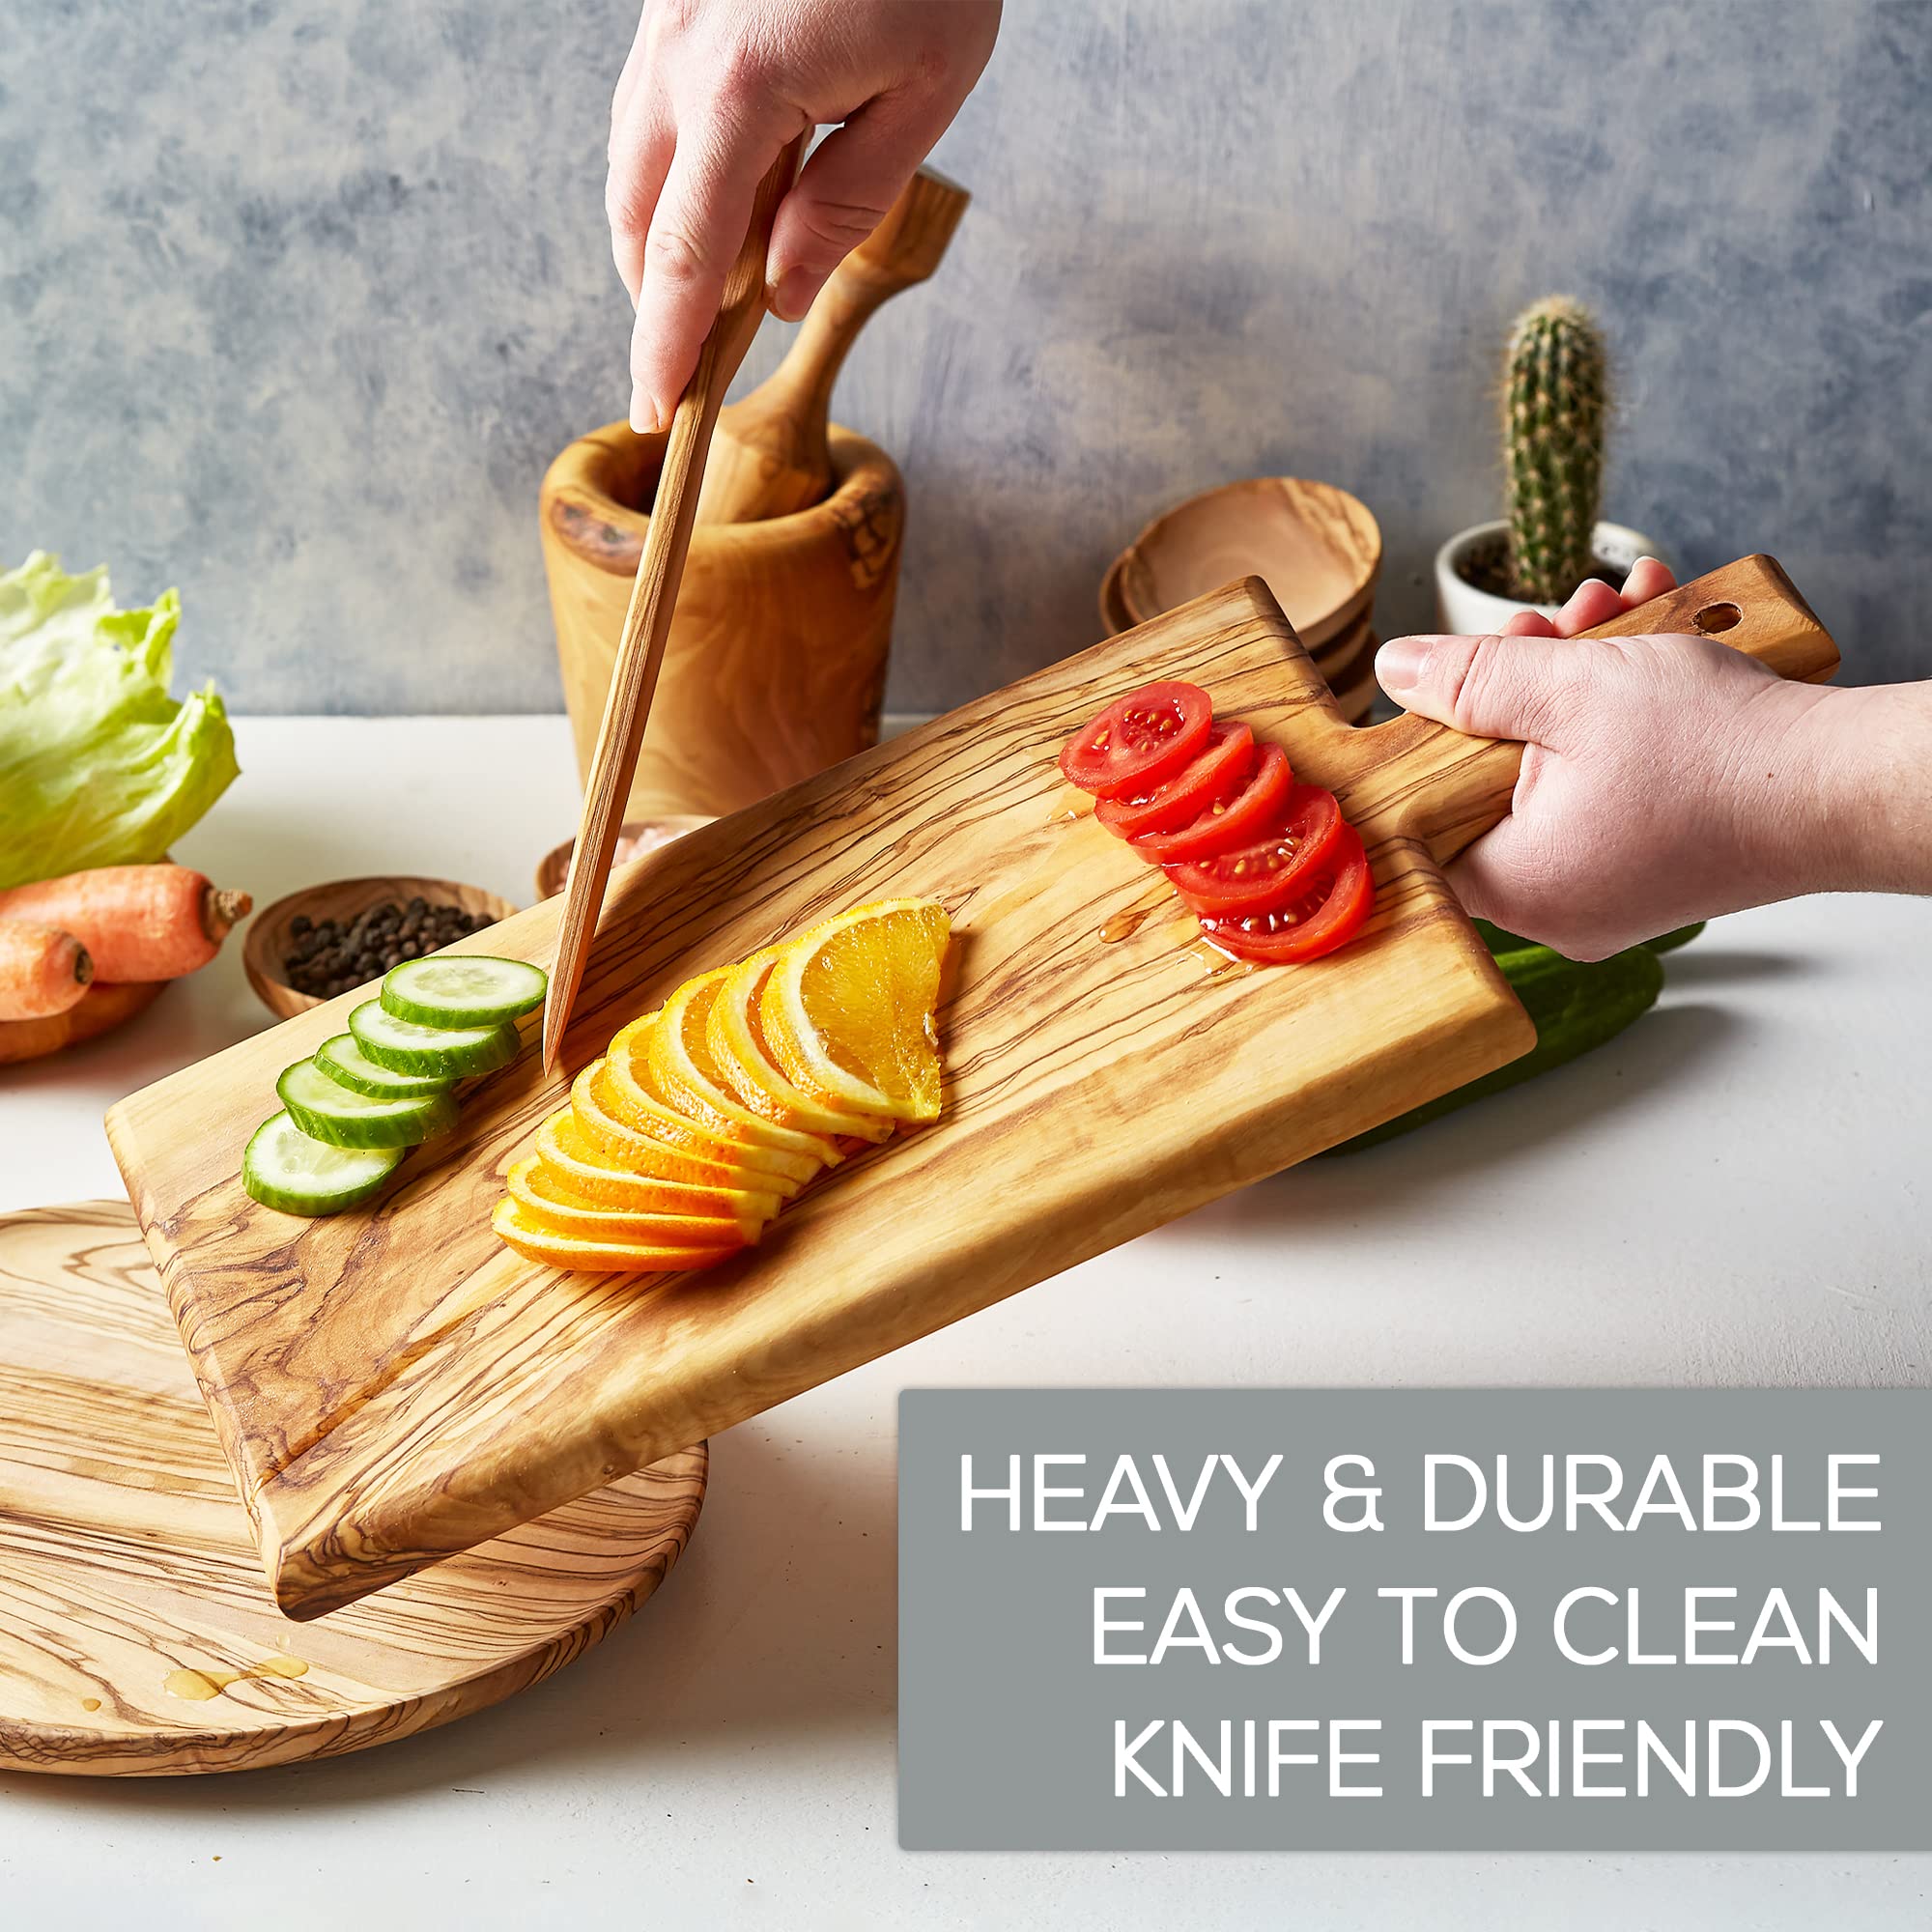 CRYSTALIA Wooden Cutting Boards for Kitchen, Olive Wood, Thick and Large Cutting Board, Handmade Chopping Block with Handle for Meat Brisket Bread Cheese, Stylish Butcher Block (Rectangular)